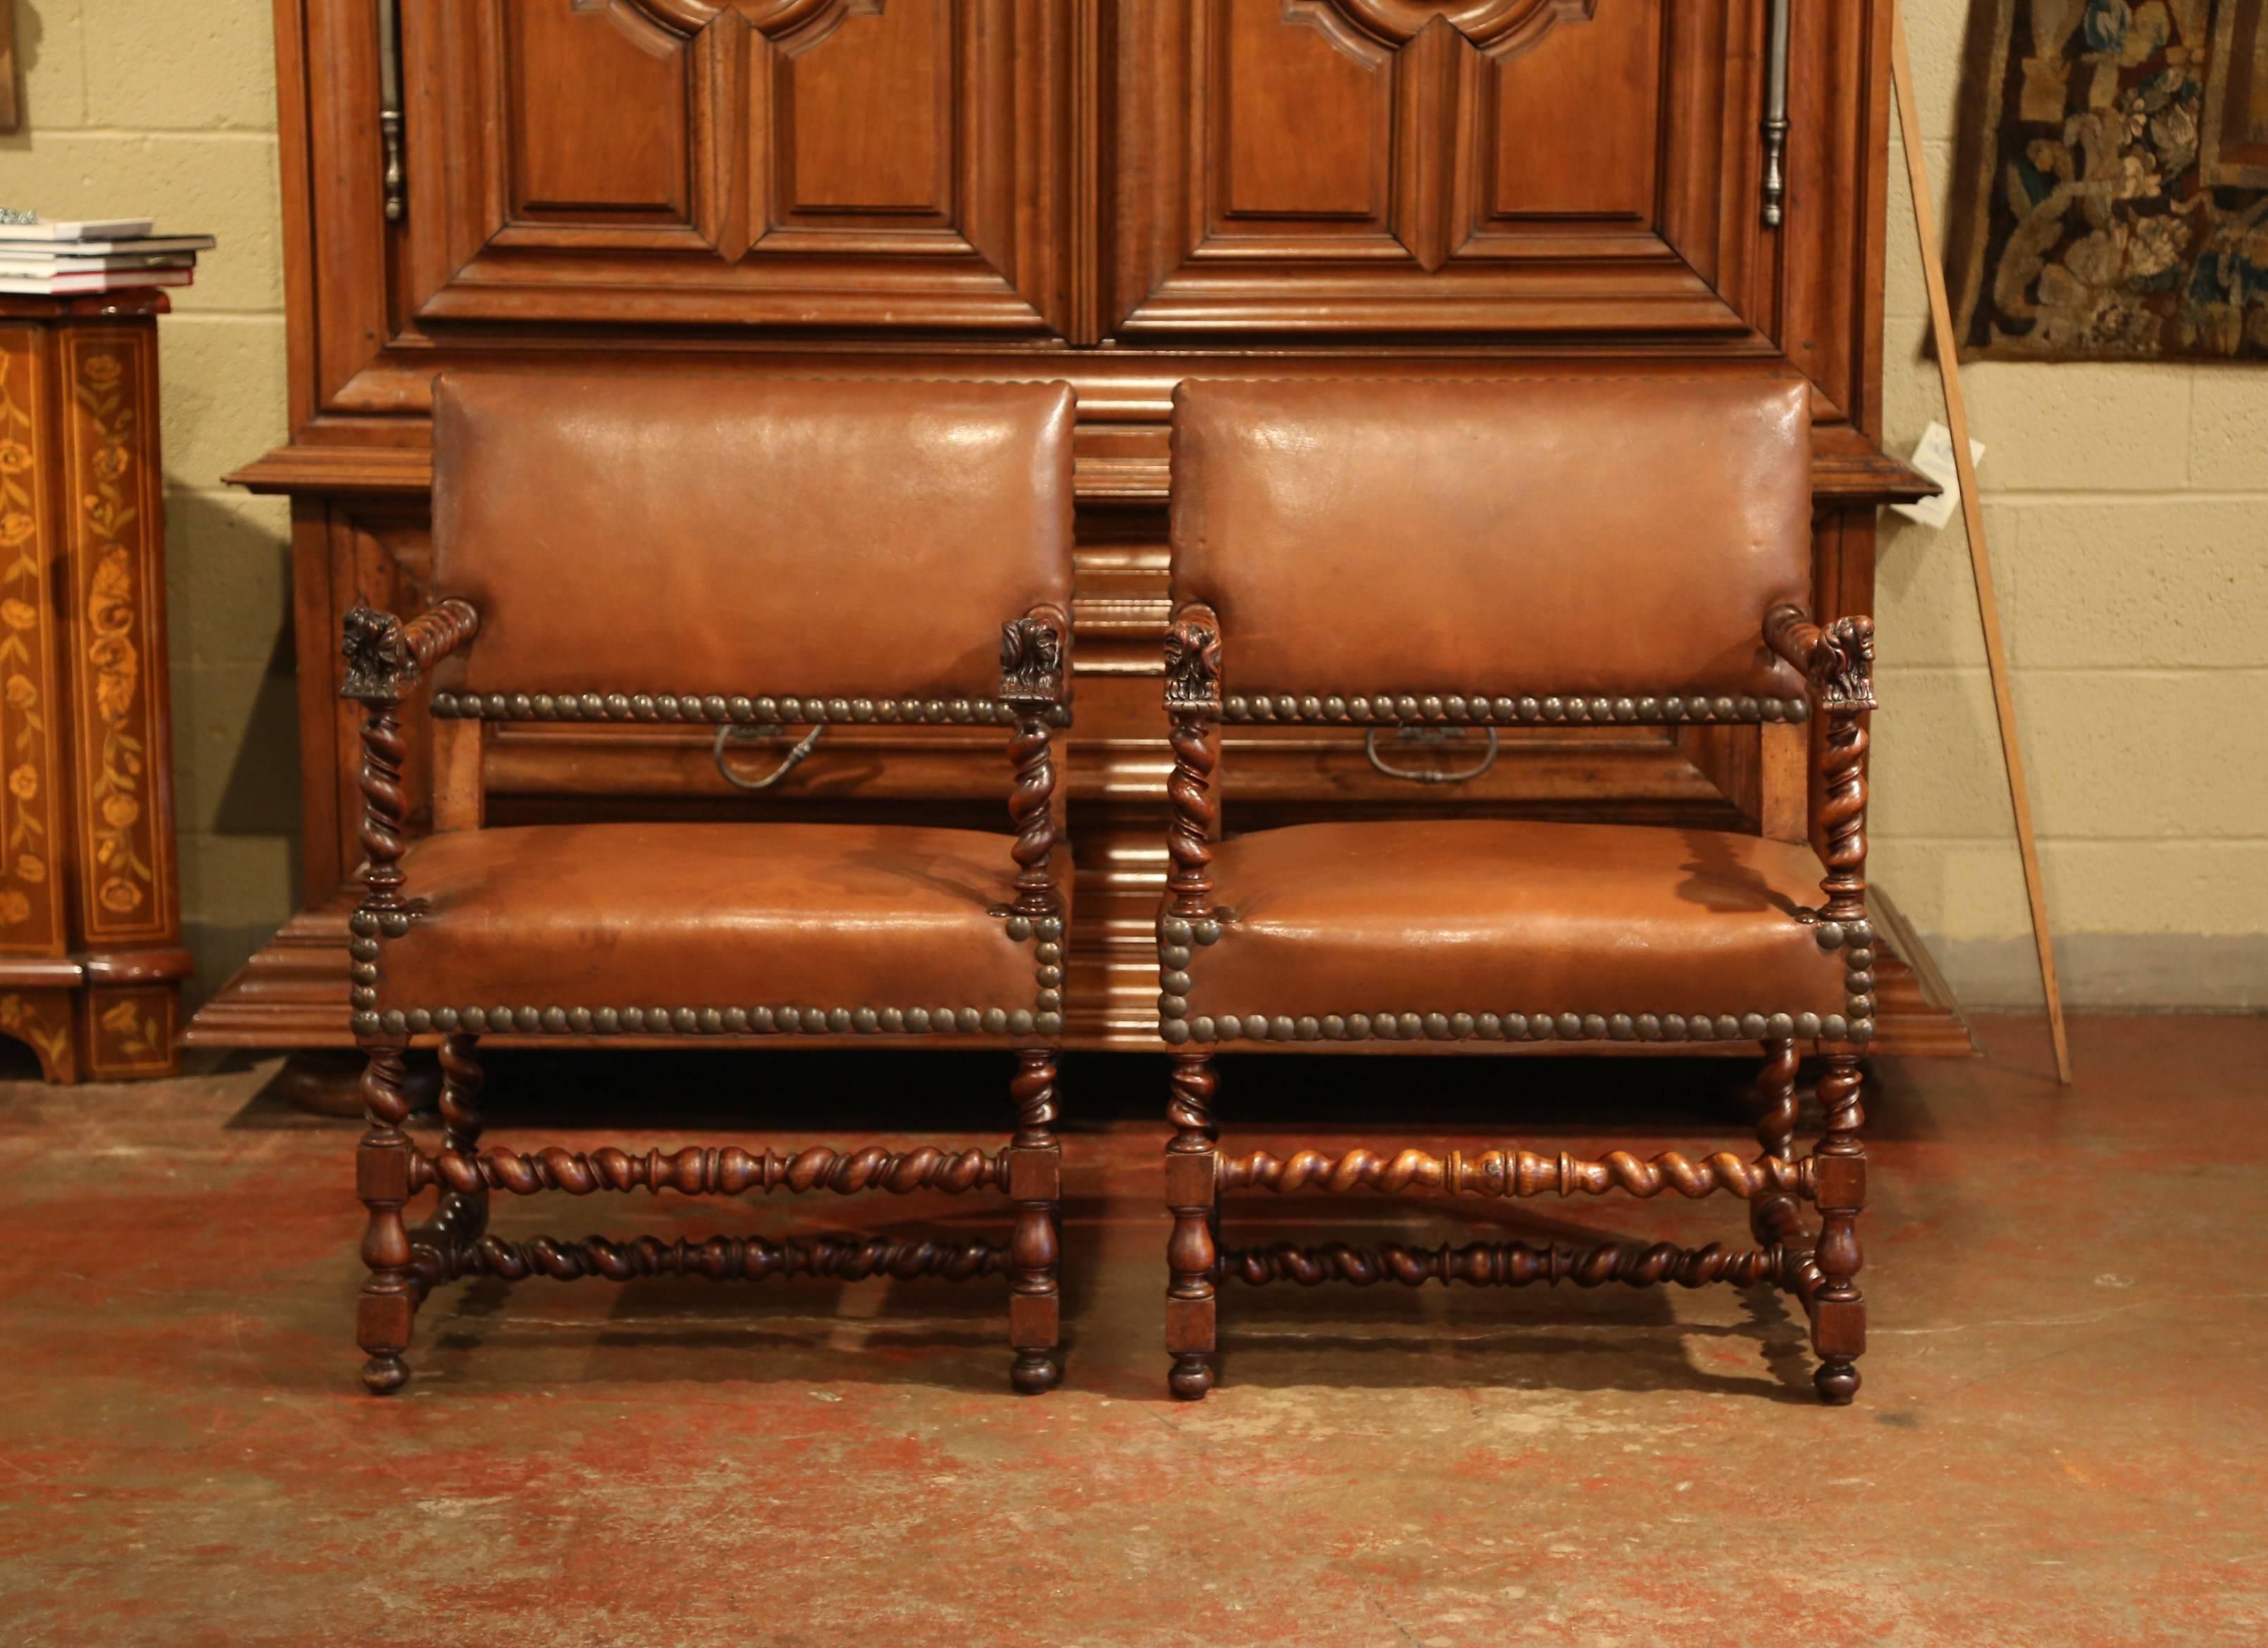 Elegant pair of antique fruitwood armchairs from the Perigord region of France; crafted, circa 1860, each chair has carved barley twist legs, stretcher and arm rests. The seat and back have the original brown leather with brass nailheads and the